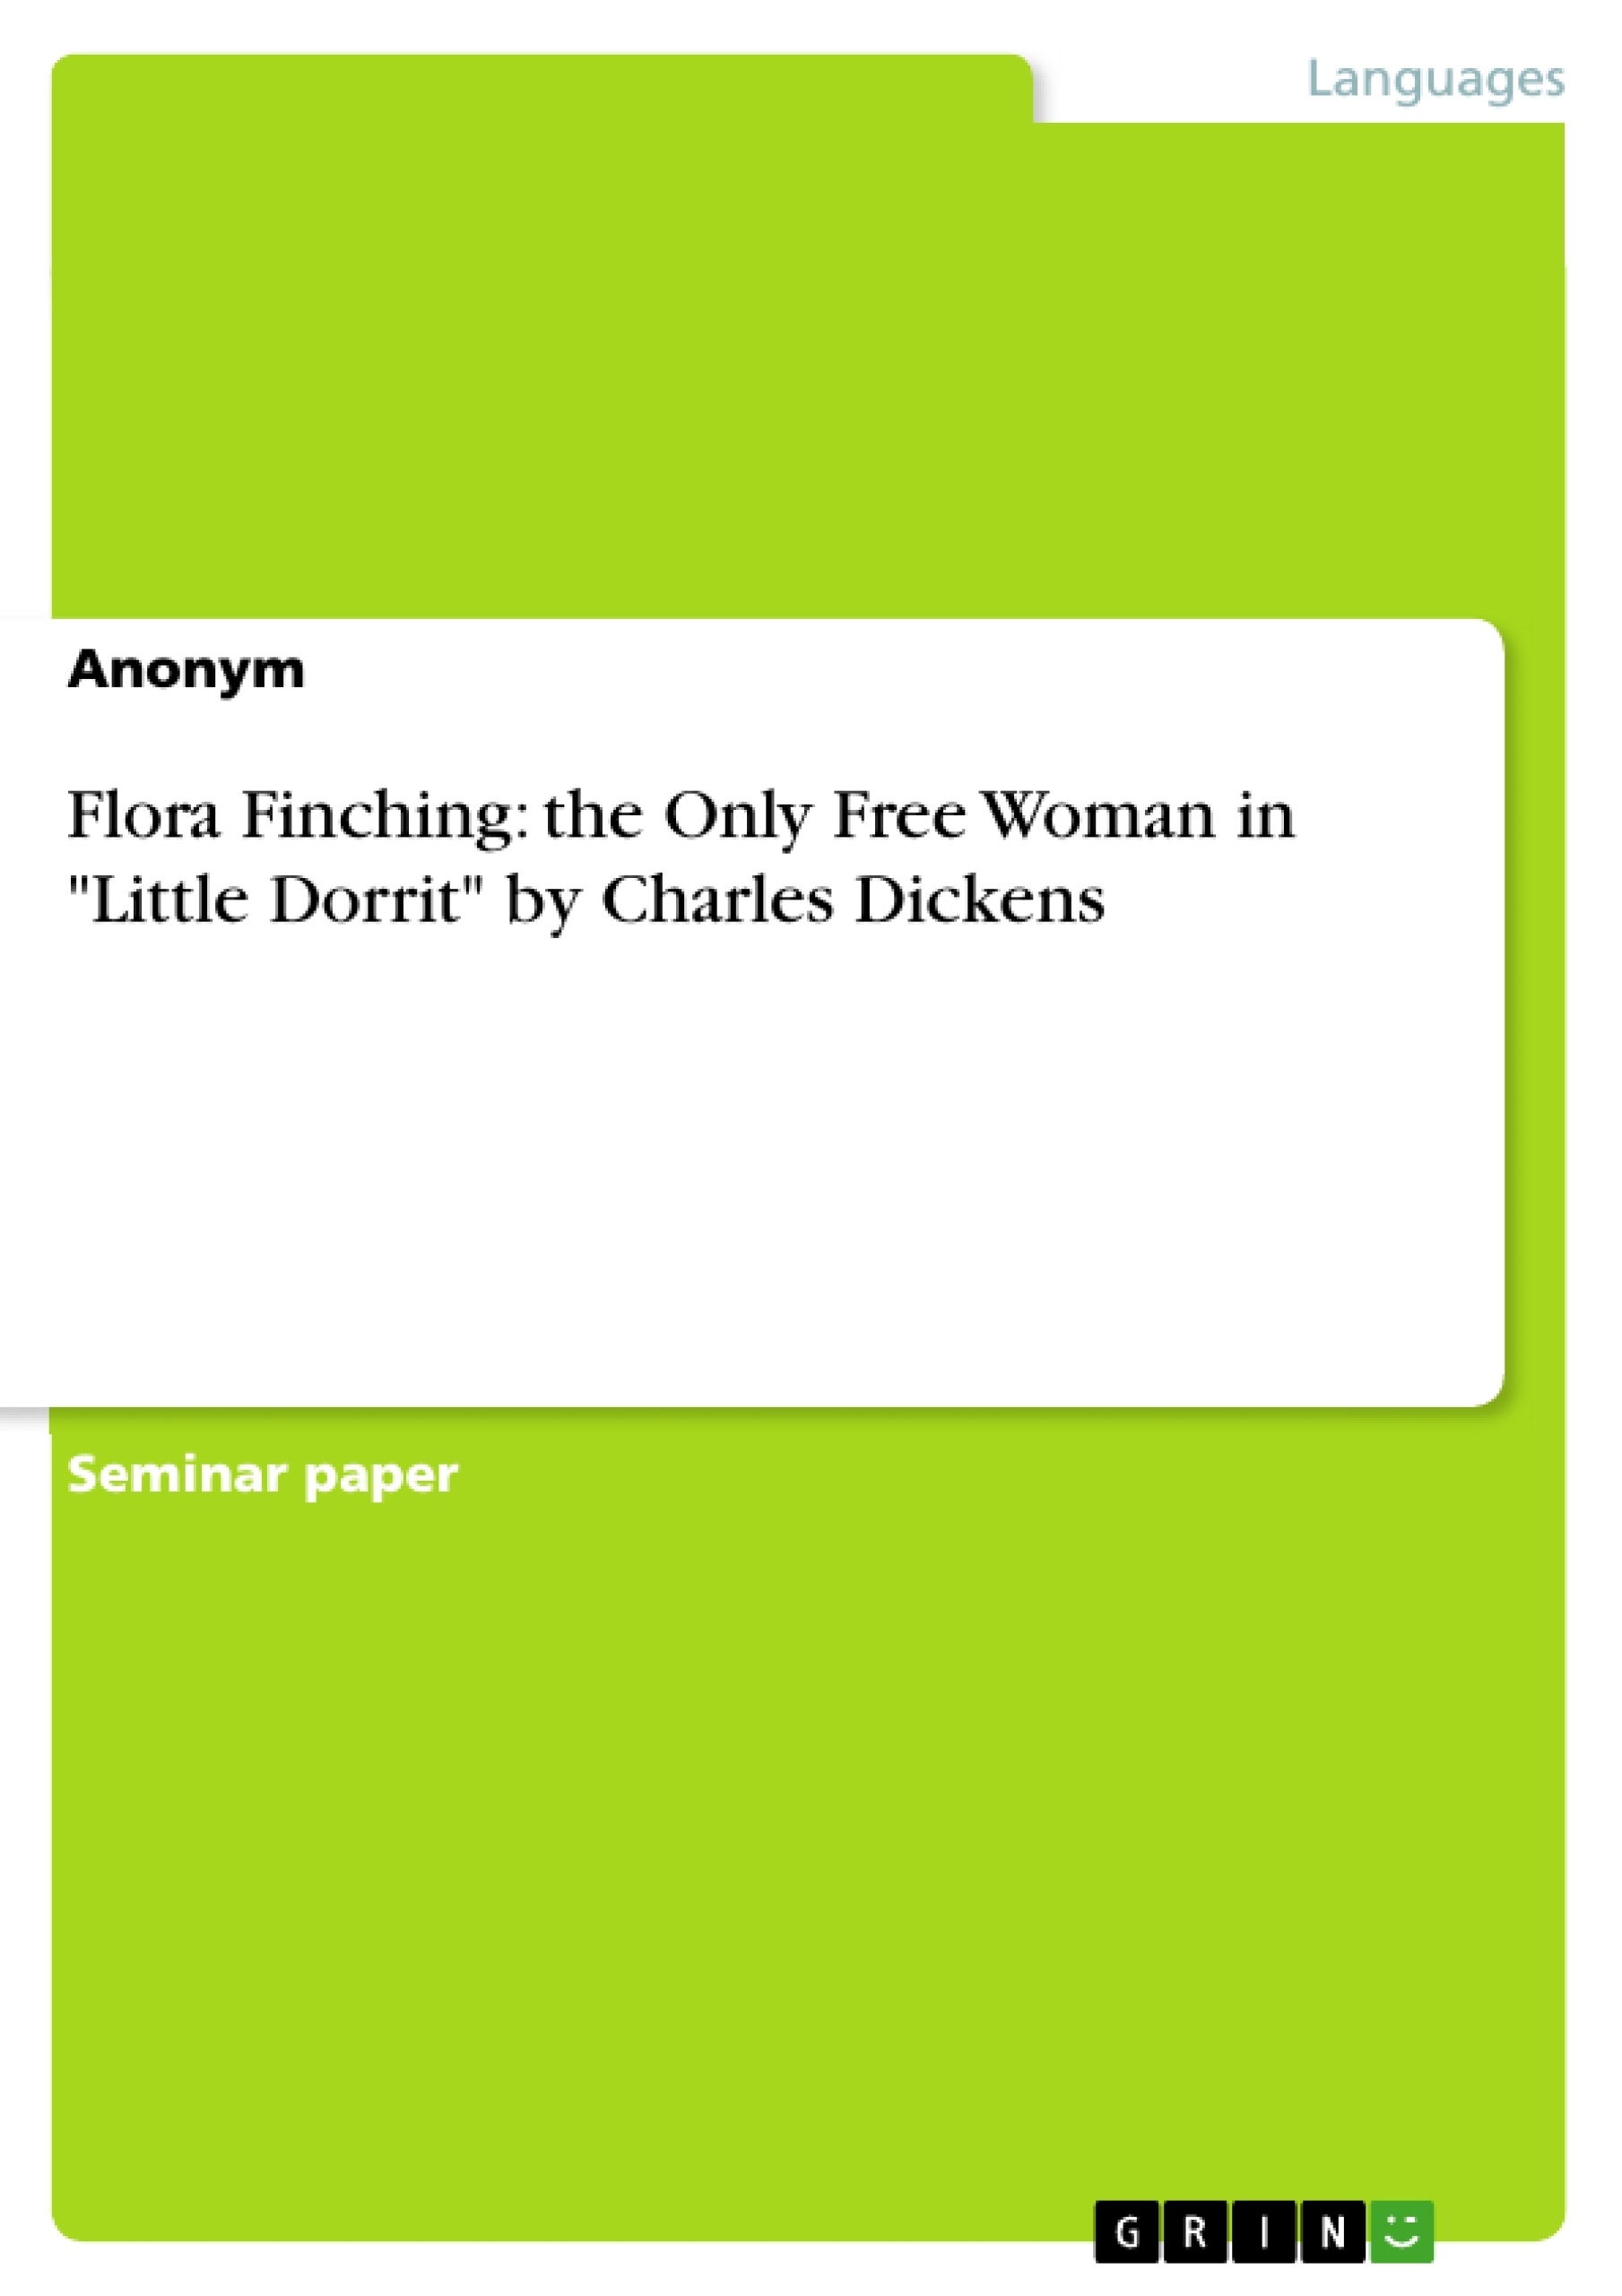 Titre: Flora Finching: the Only Free Woman in "Little Dorrit" by Charles Dickens